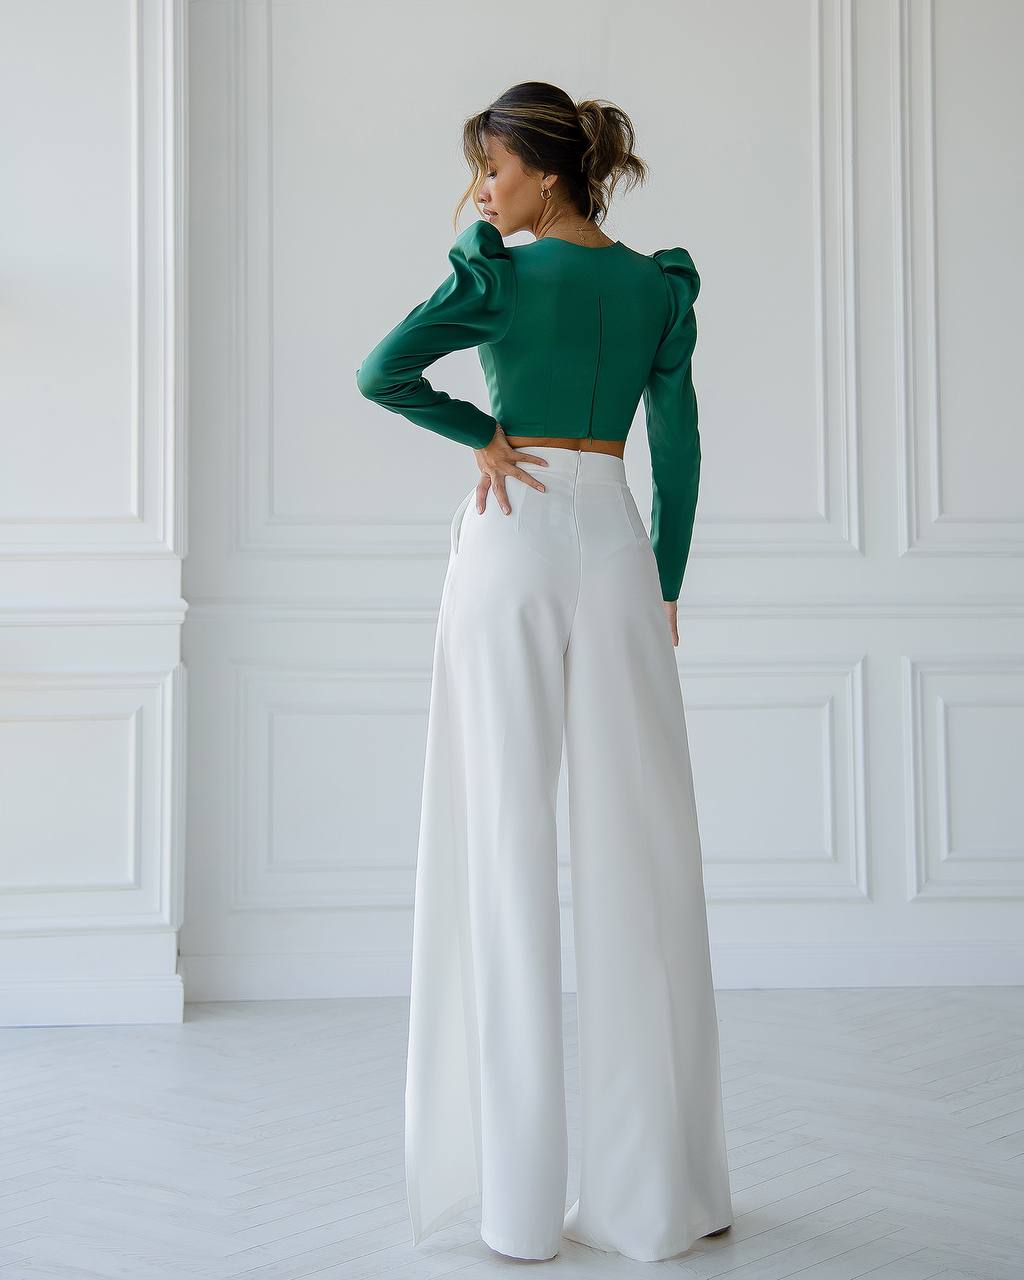 a woman in a green top and white pants